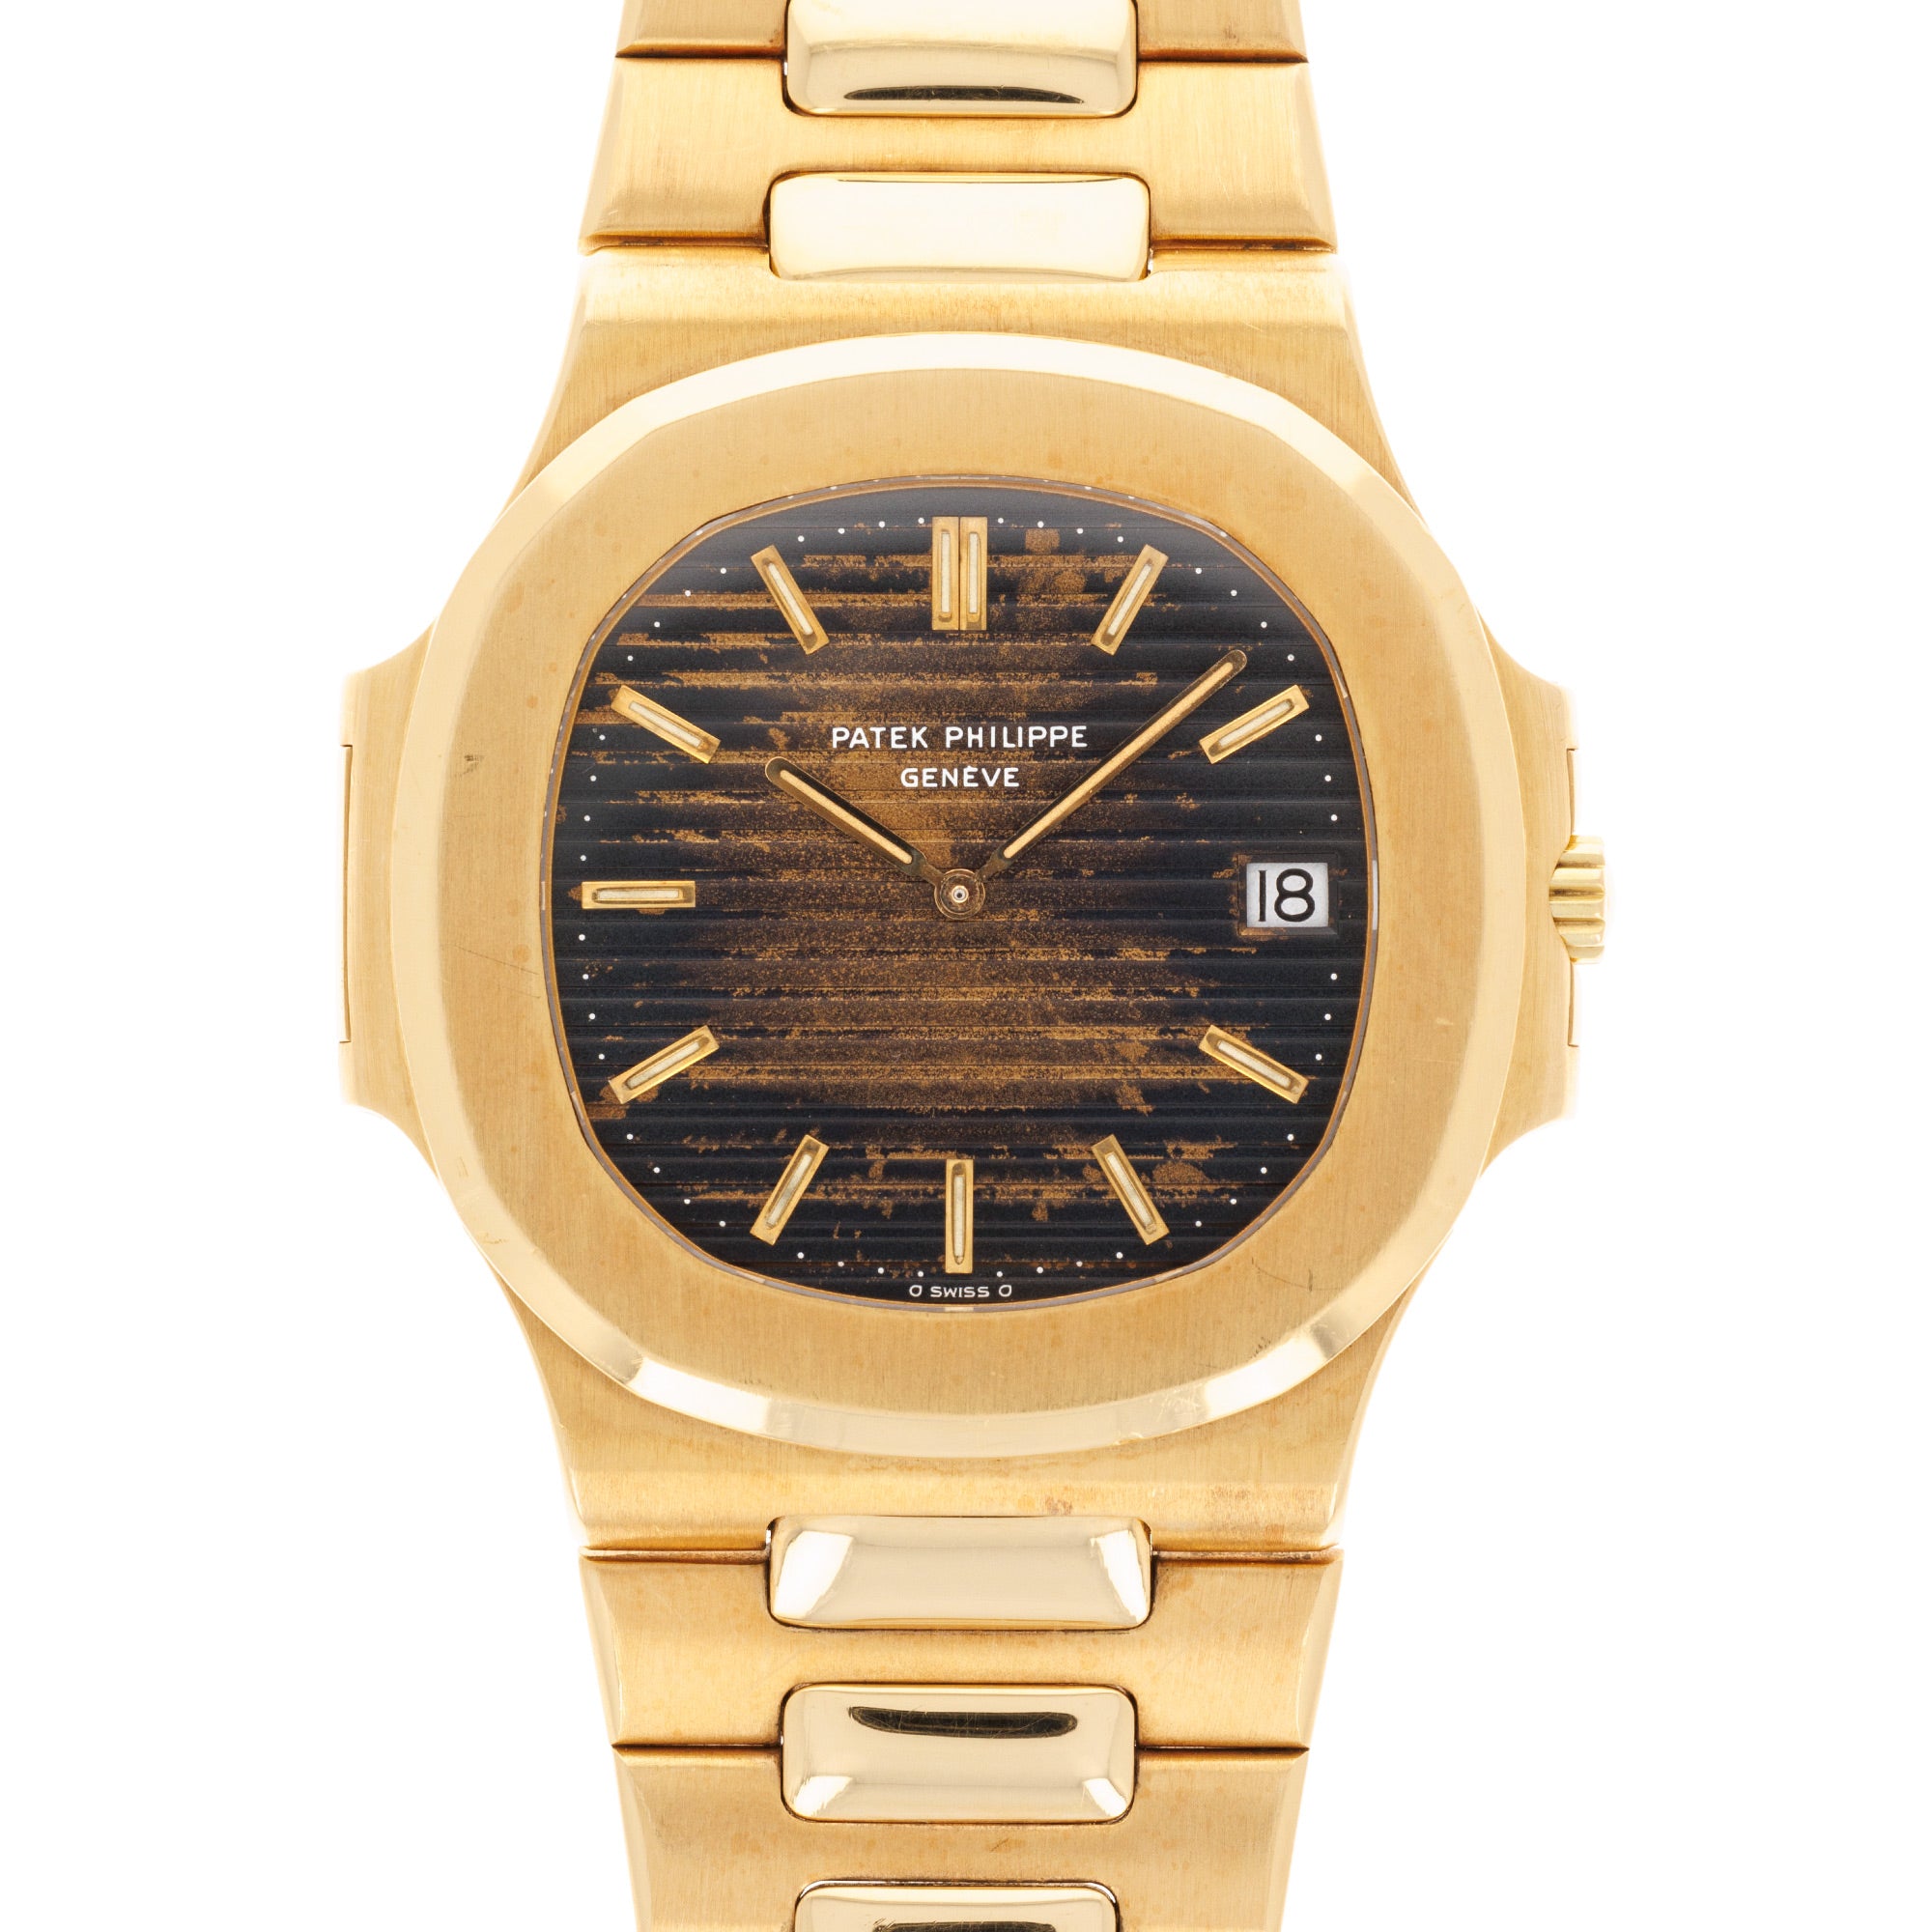 Patek Philippe - Patek Philippe Yellow Gold Jumbo Nautilus Watch Ref. 3700 with Attractive Tropical Dial - The Keystone Watches